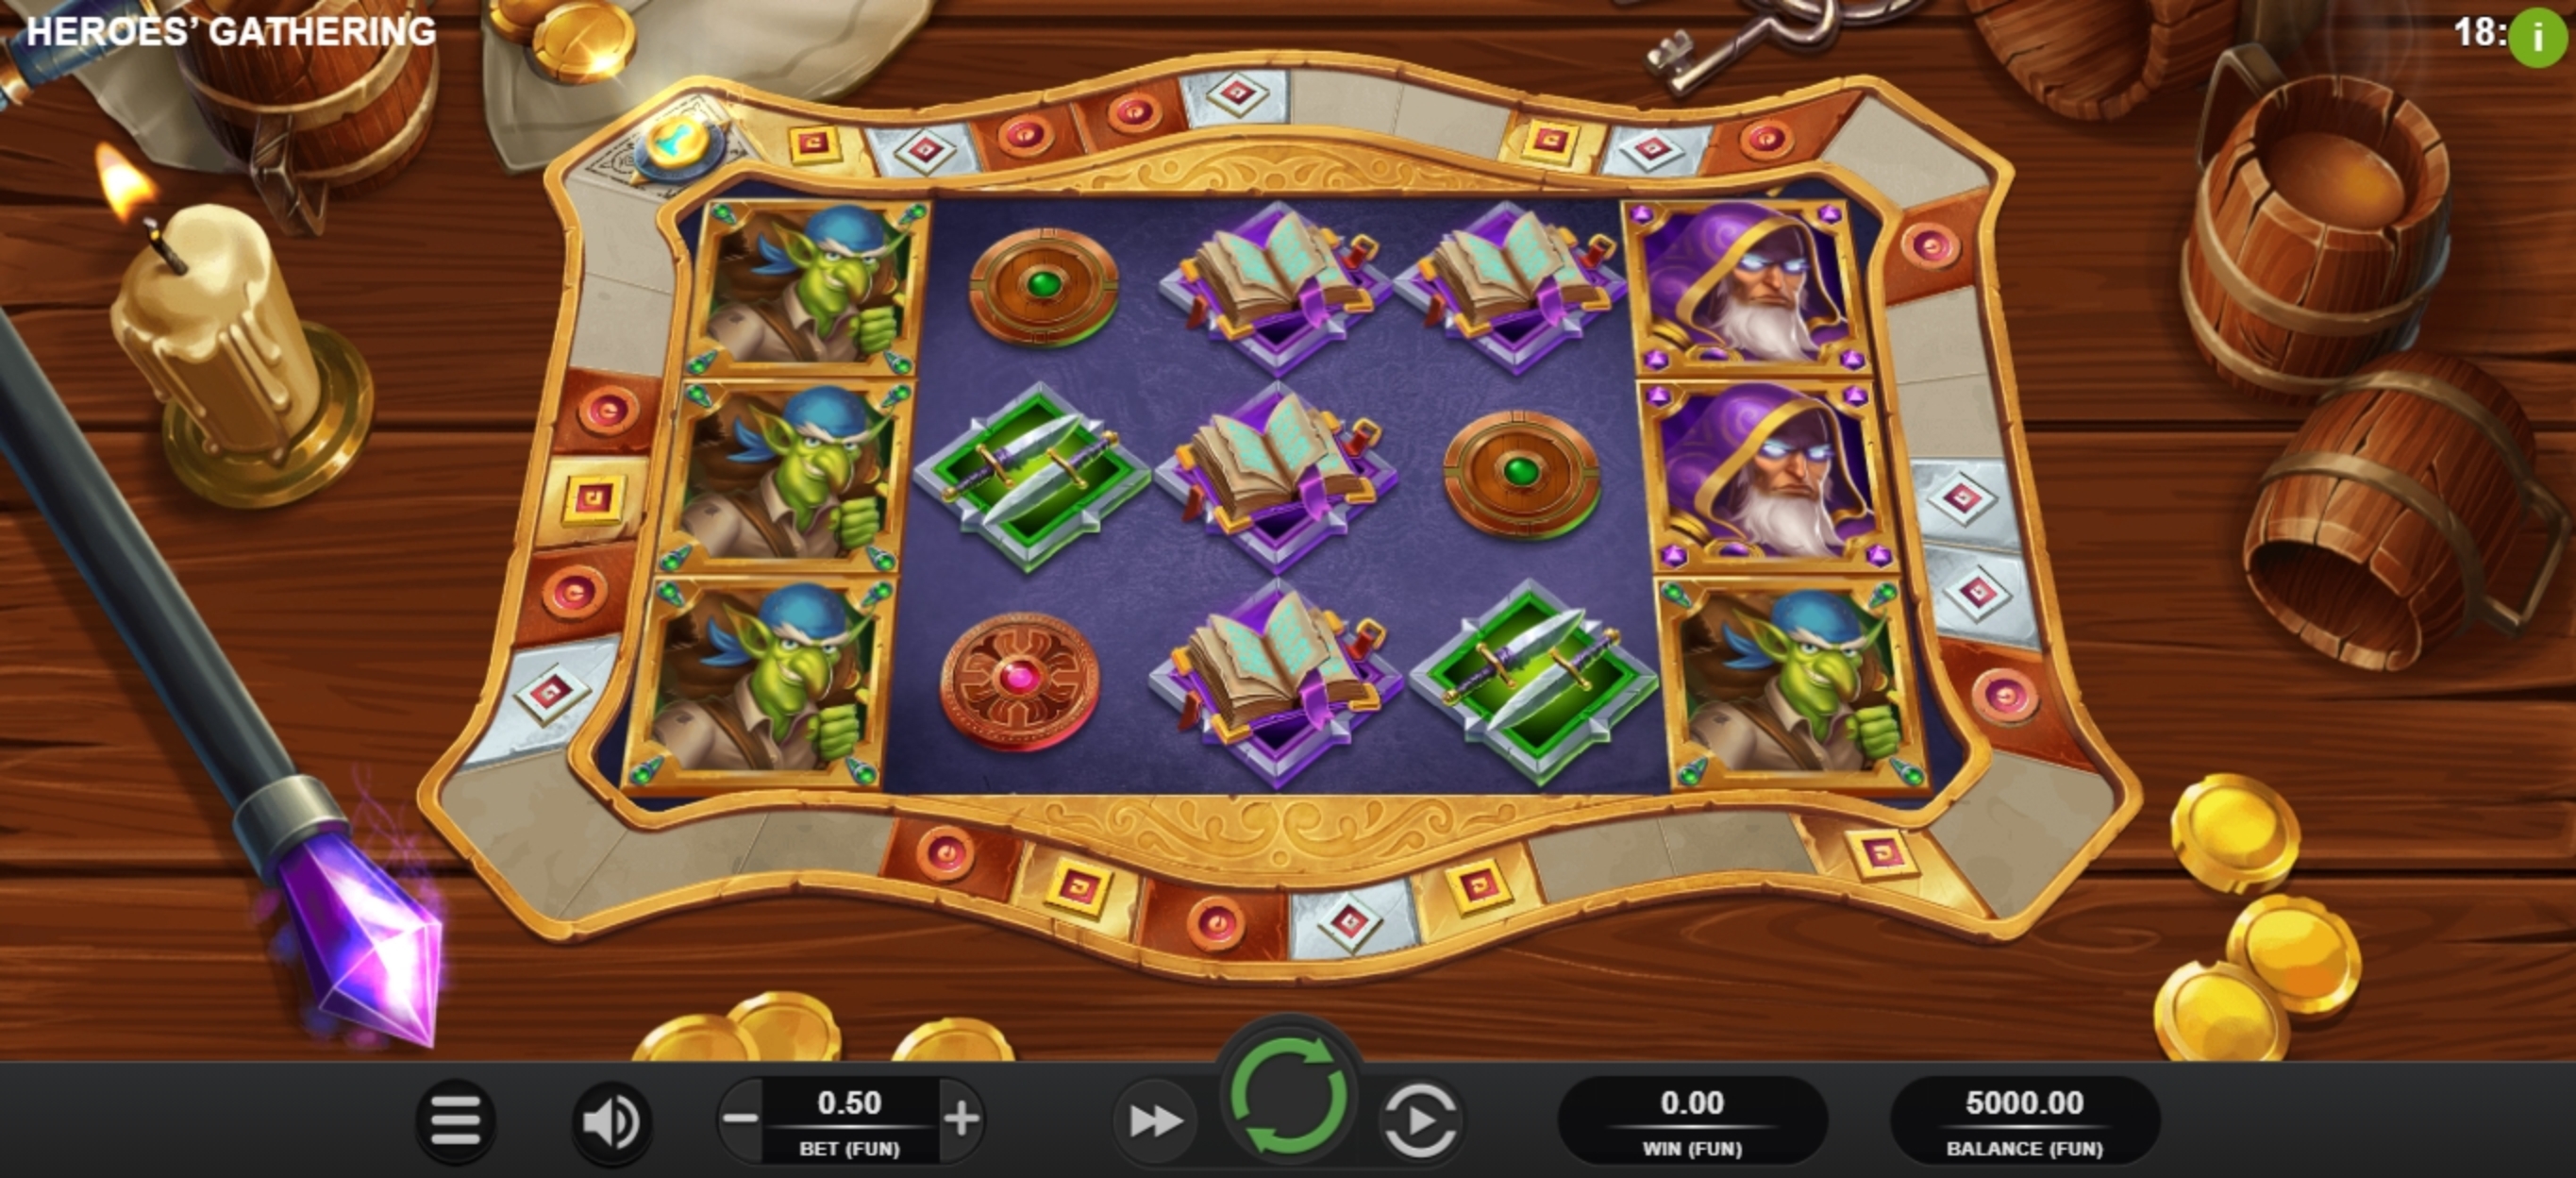 Reels in Heroes Gathering Slot Game by Relax Gaming